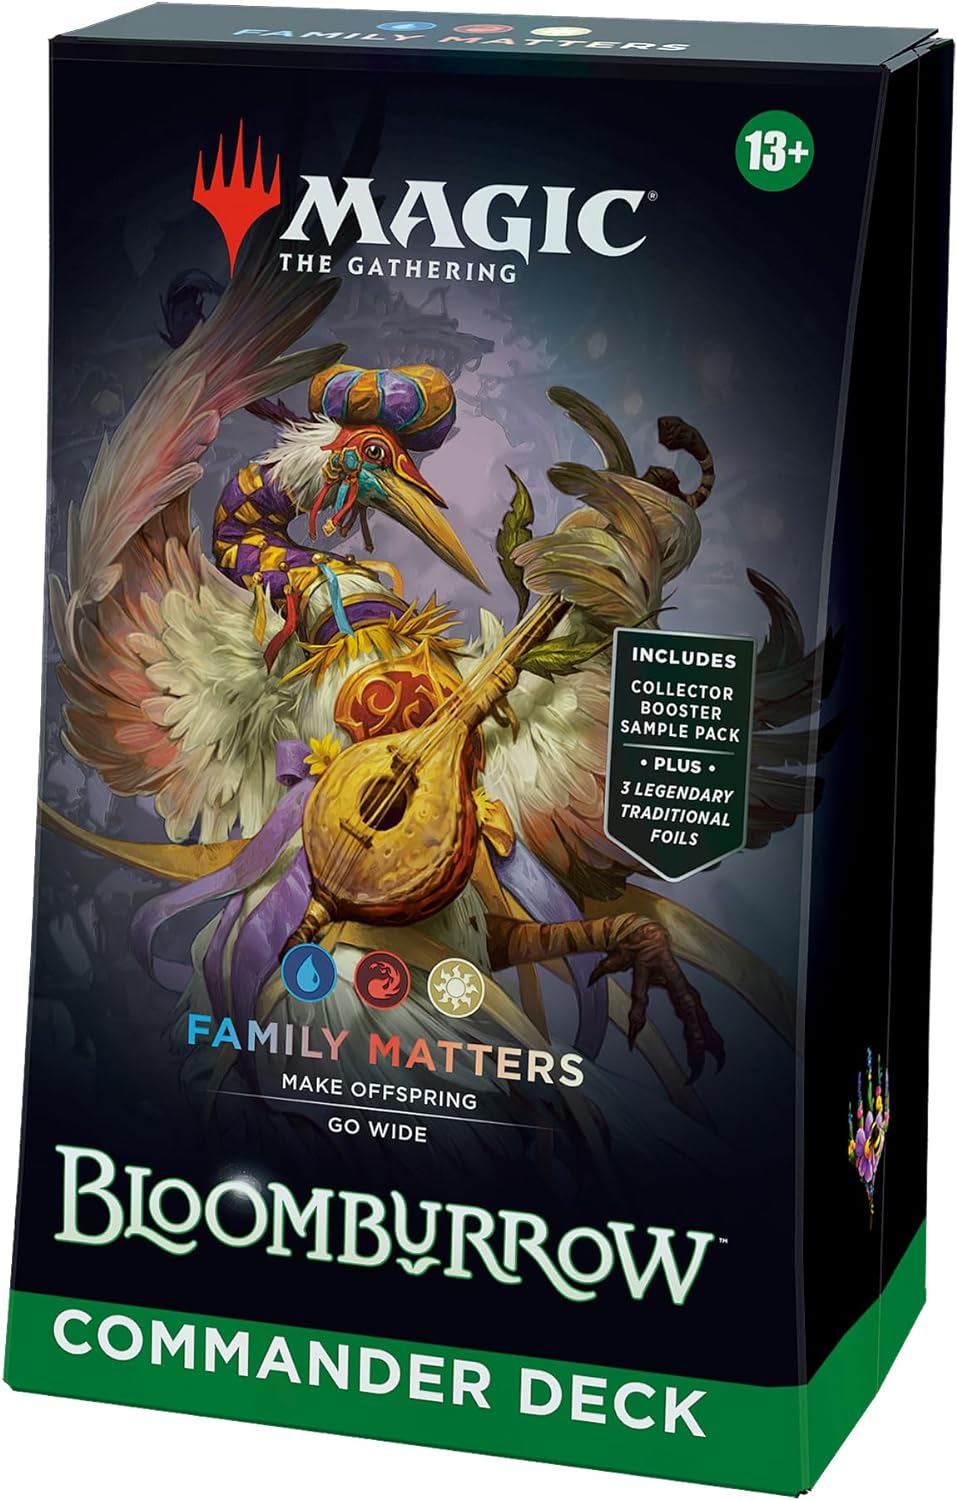 PRE-ORDER: Bloomburrow Commander Deck - Family Matters (100-Card Deck, 2-Card Collector Booster Sample Pack + Accessories) Magic: The Gathering